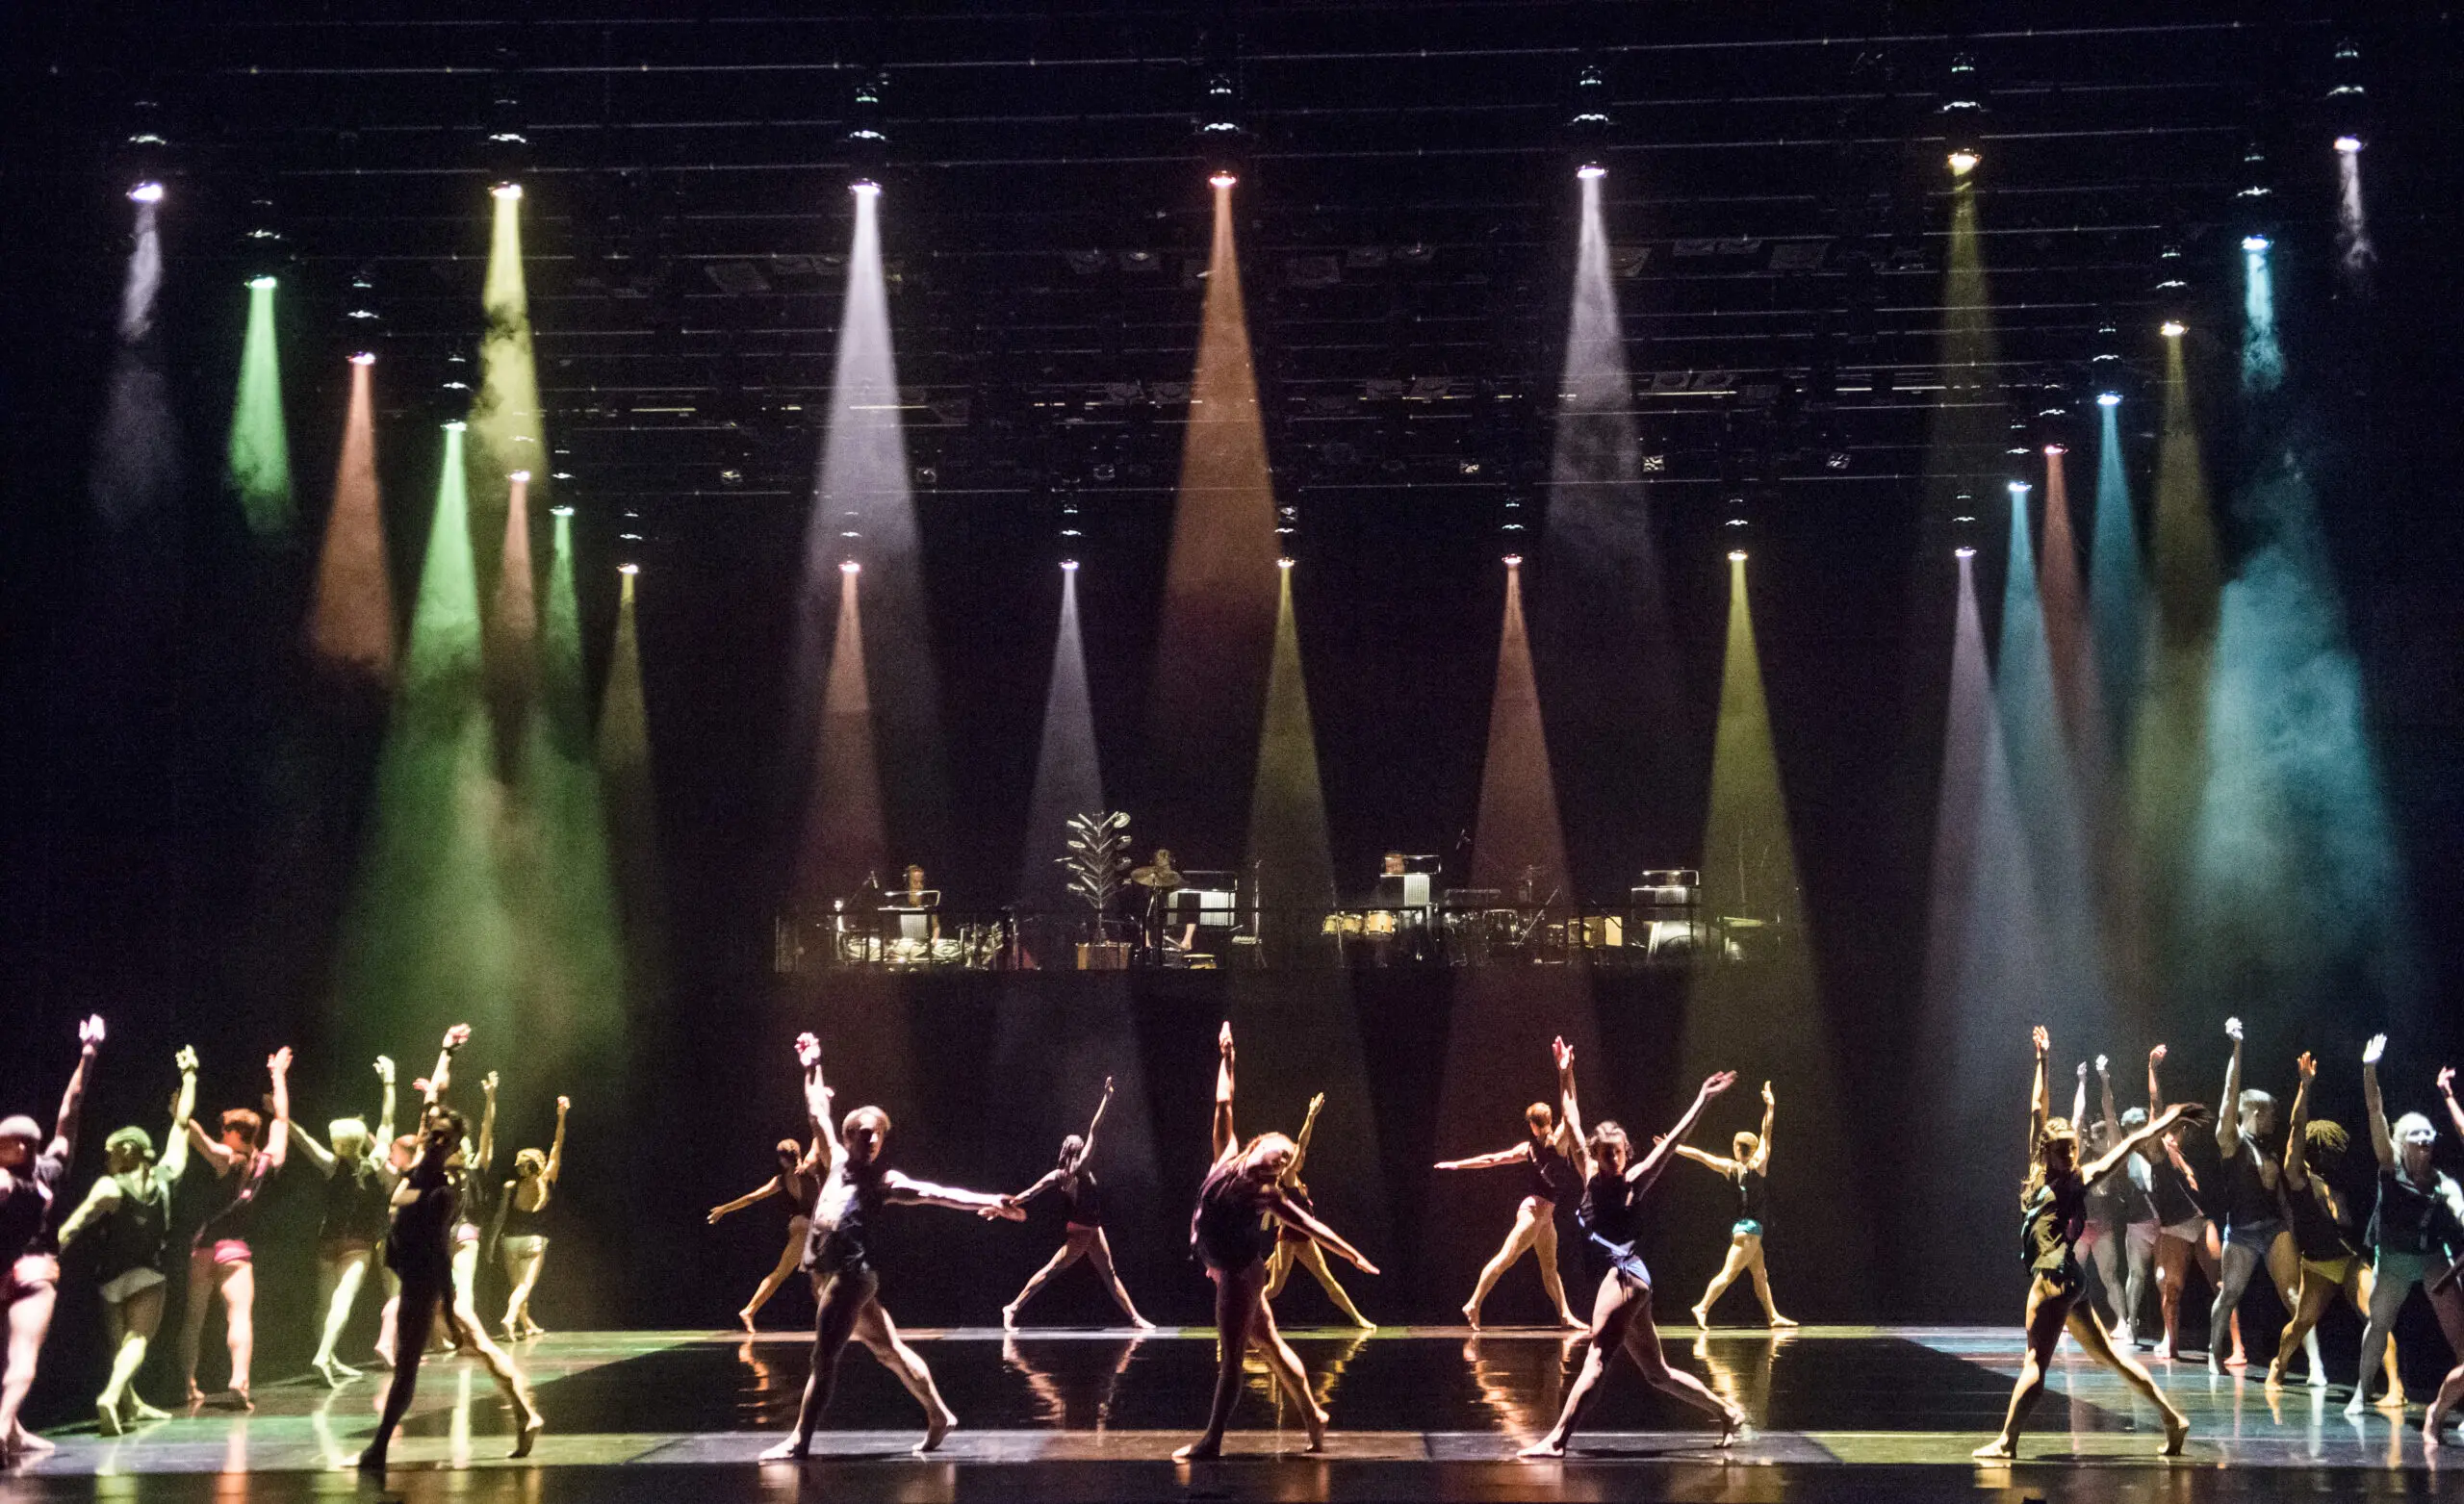 A group of dancers on stage with colorful lights.